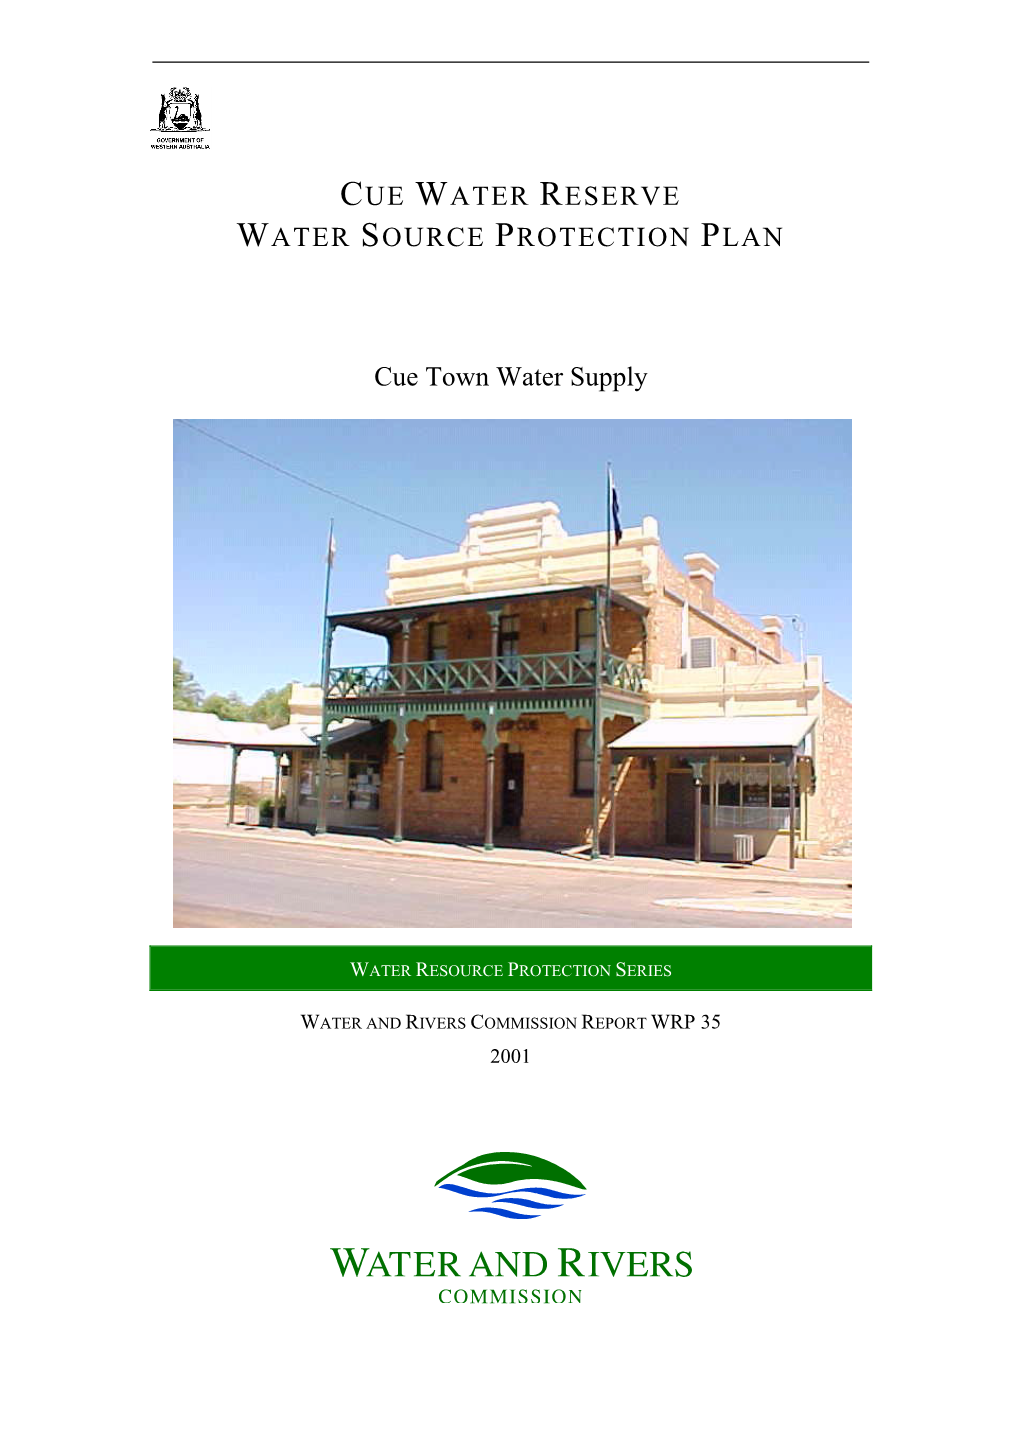 CUE WATER RESERVE WATER SOURCE PROTECTION PLAN Cue Town Water Supply